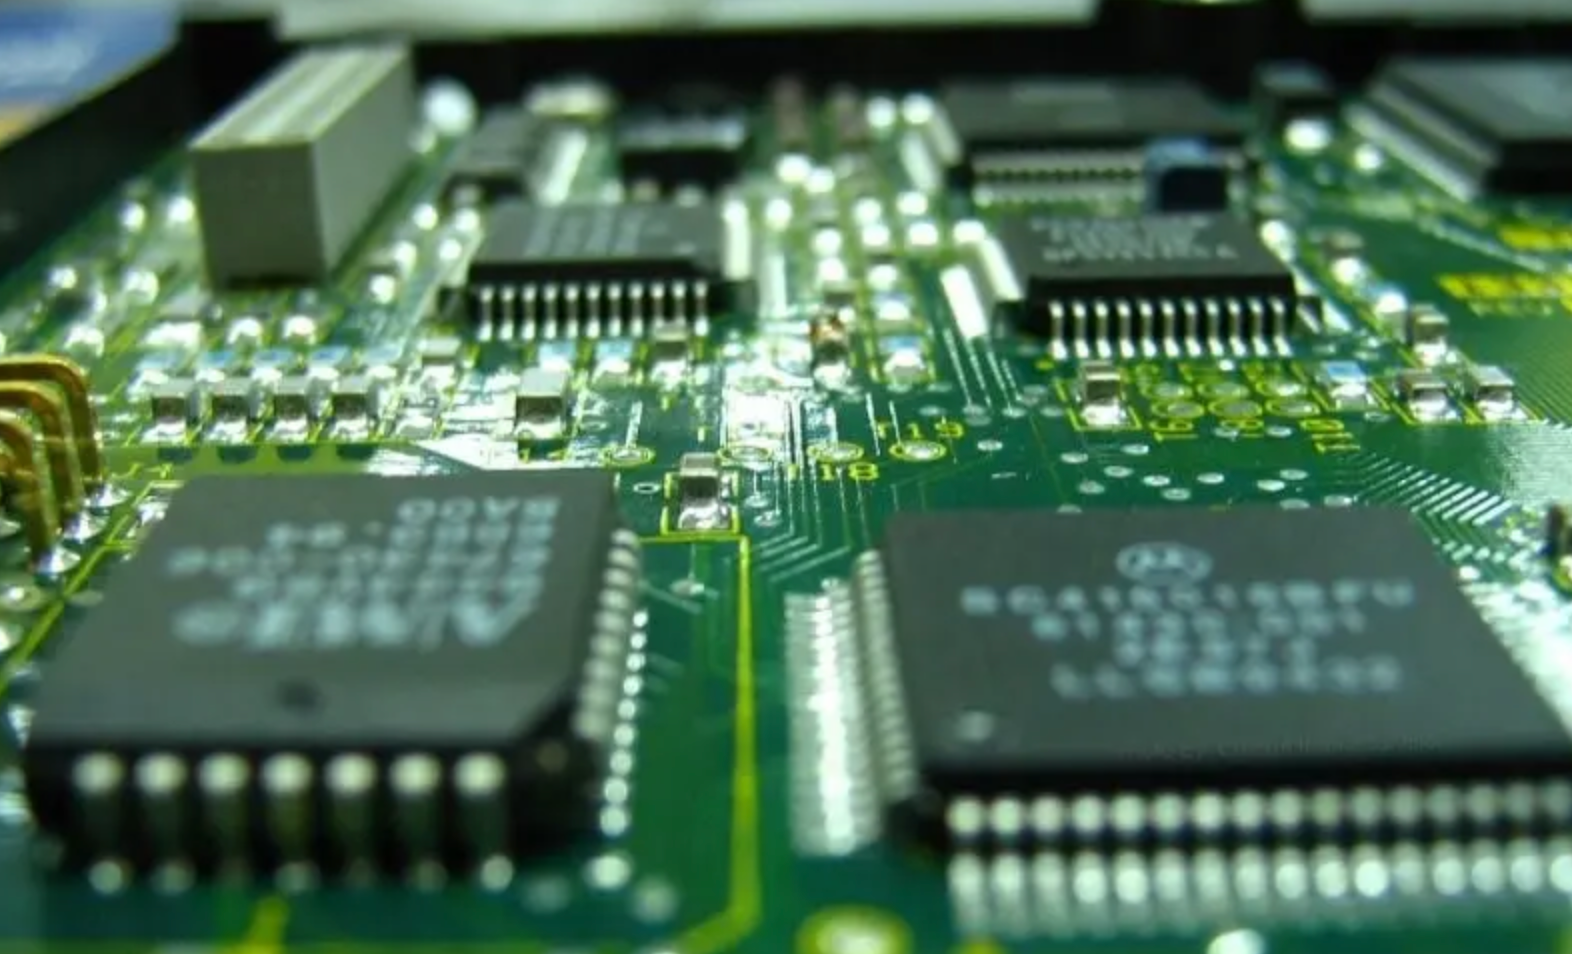 Malaysian semiconductor exports to reach RM1.2 trillion by 2030 – MSIA